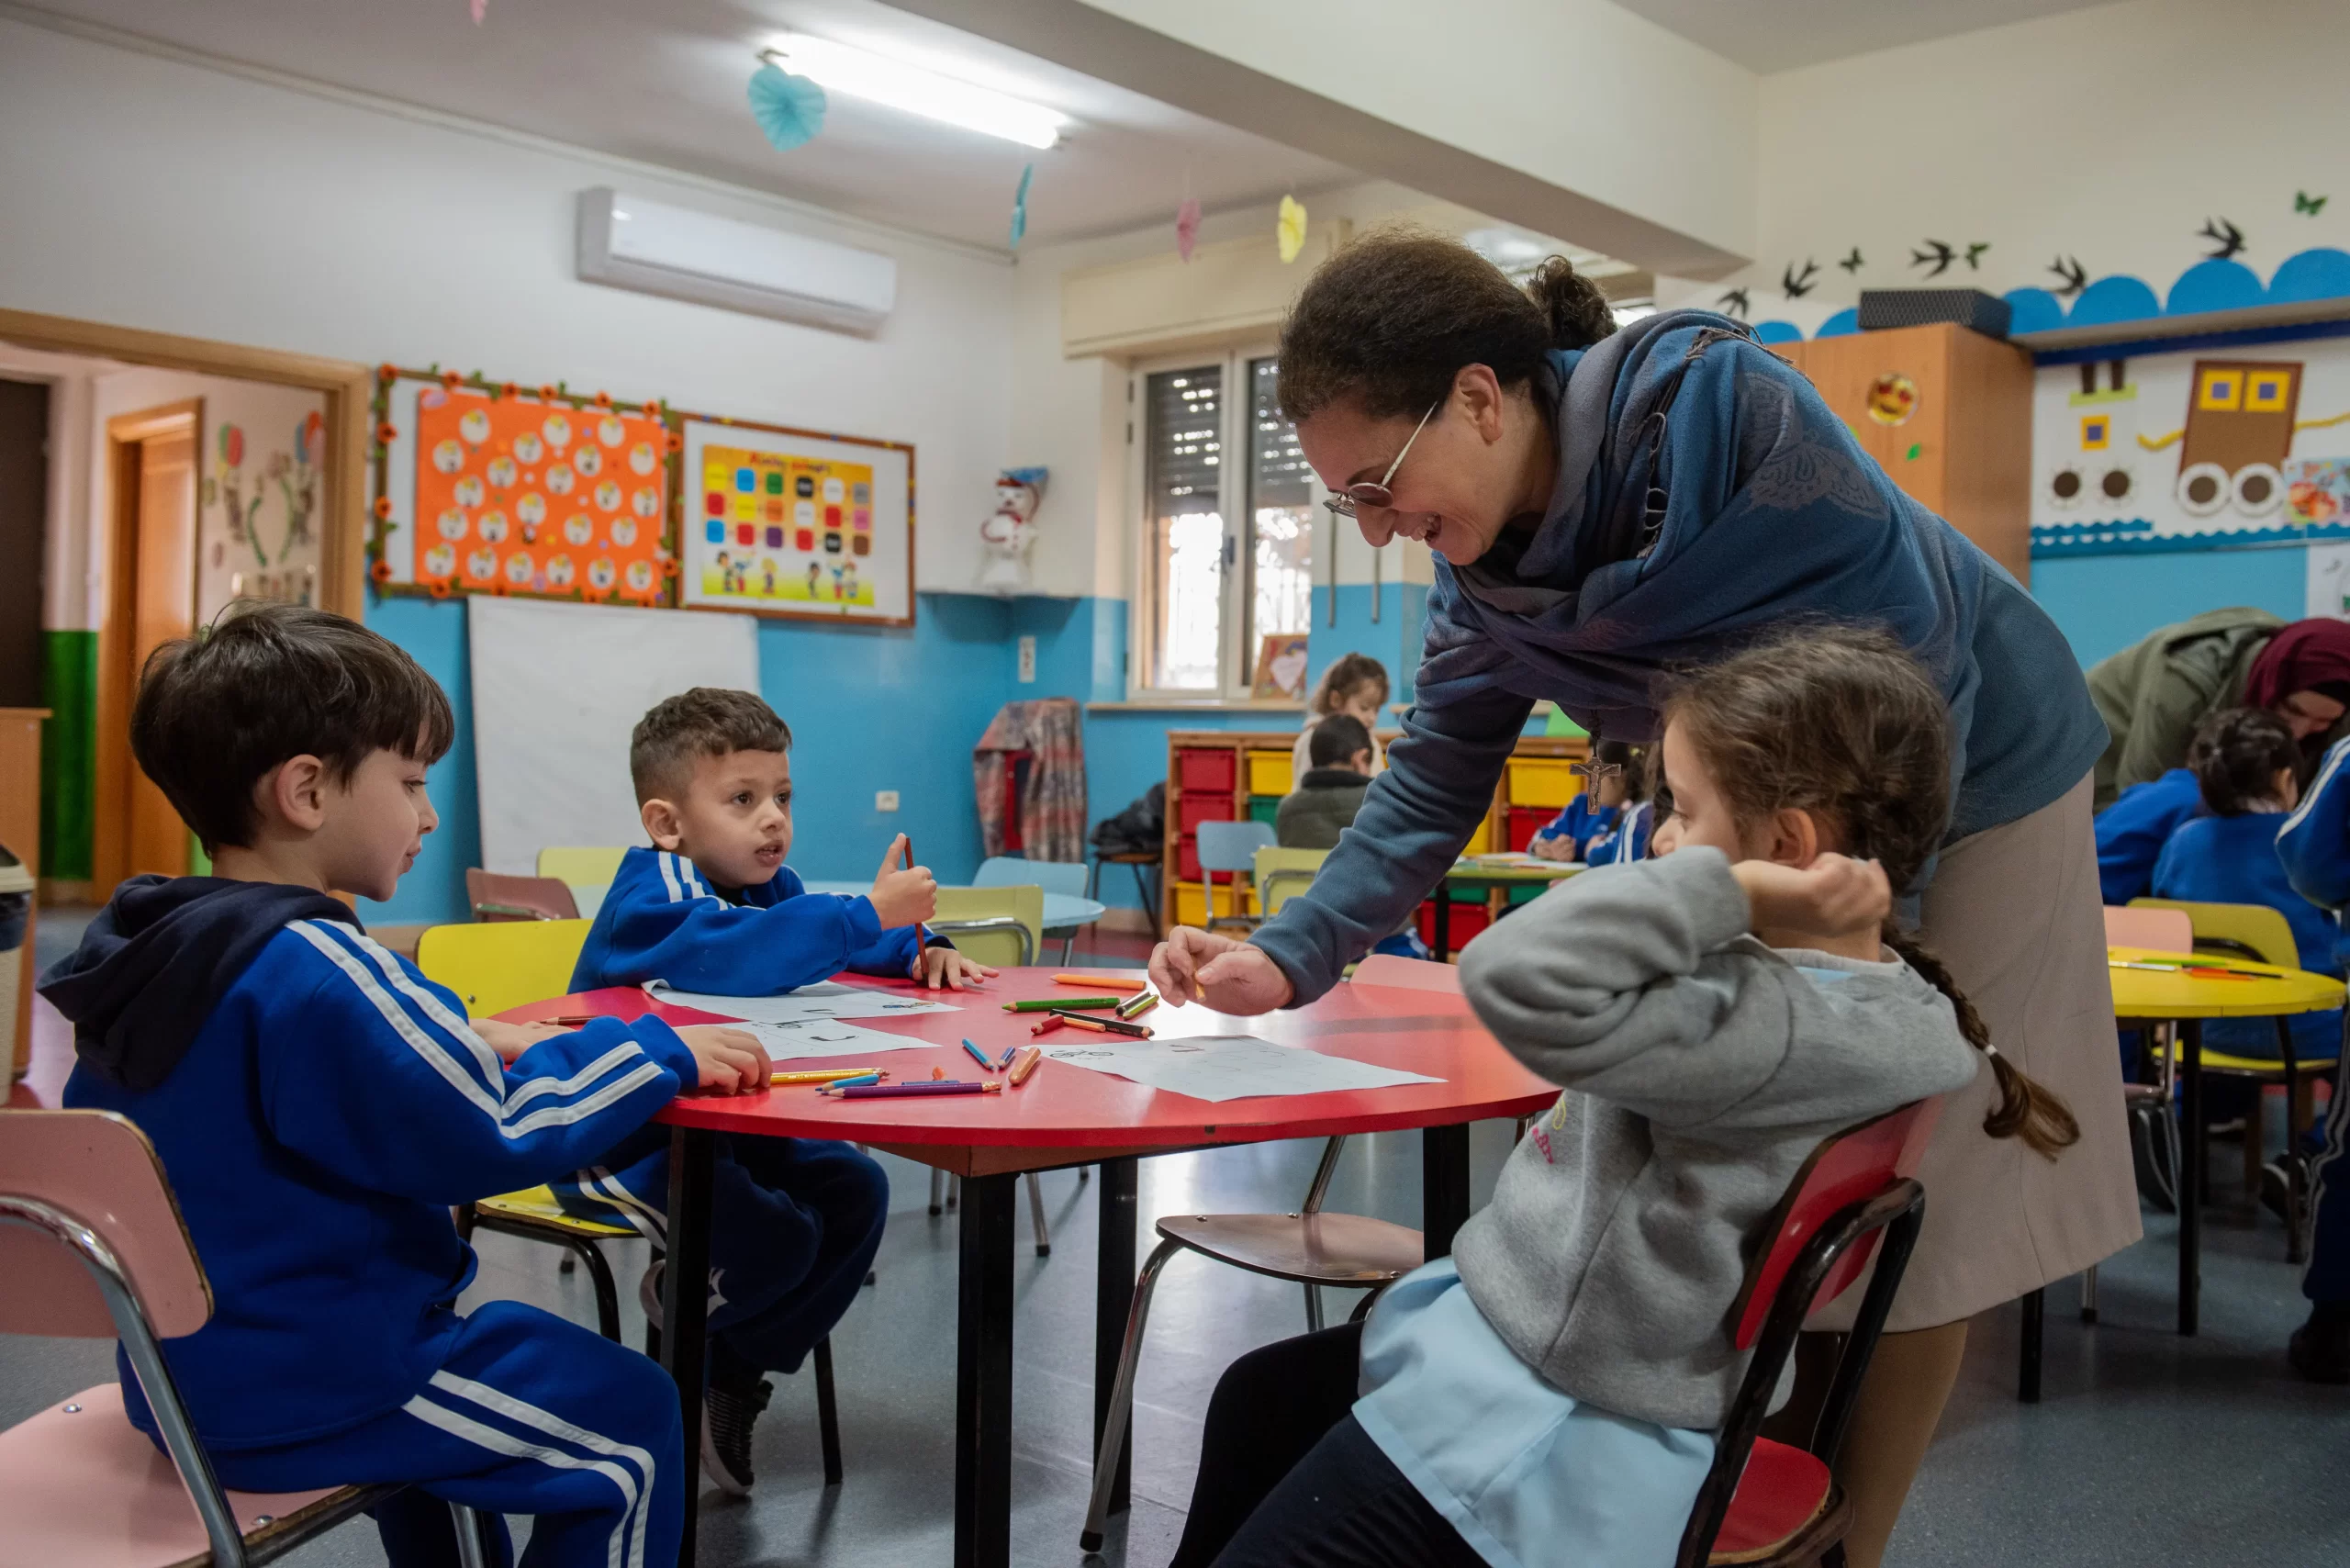 Sister Anna Maria Sgaramella of the Comboni Sisters talks with the children in one of the kindergarten classes hosted at their home in East Jerusalem. The presence of the kindergarten has never been questioned, said Sgaramella, the director. Credit: Marinella Bandini